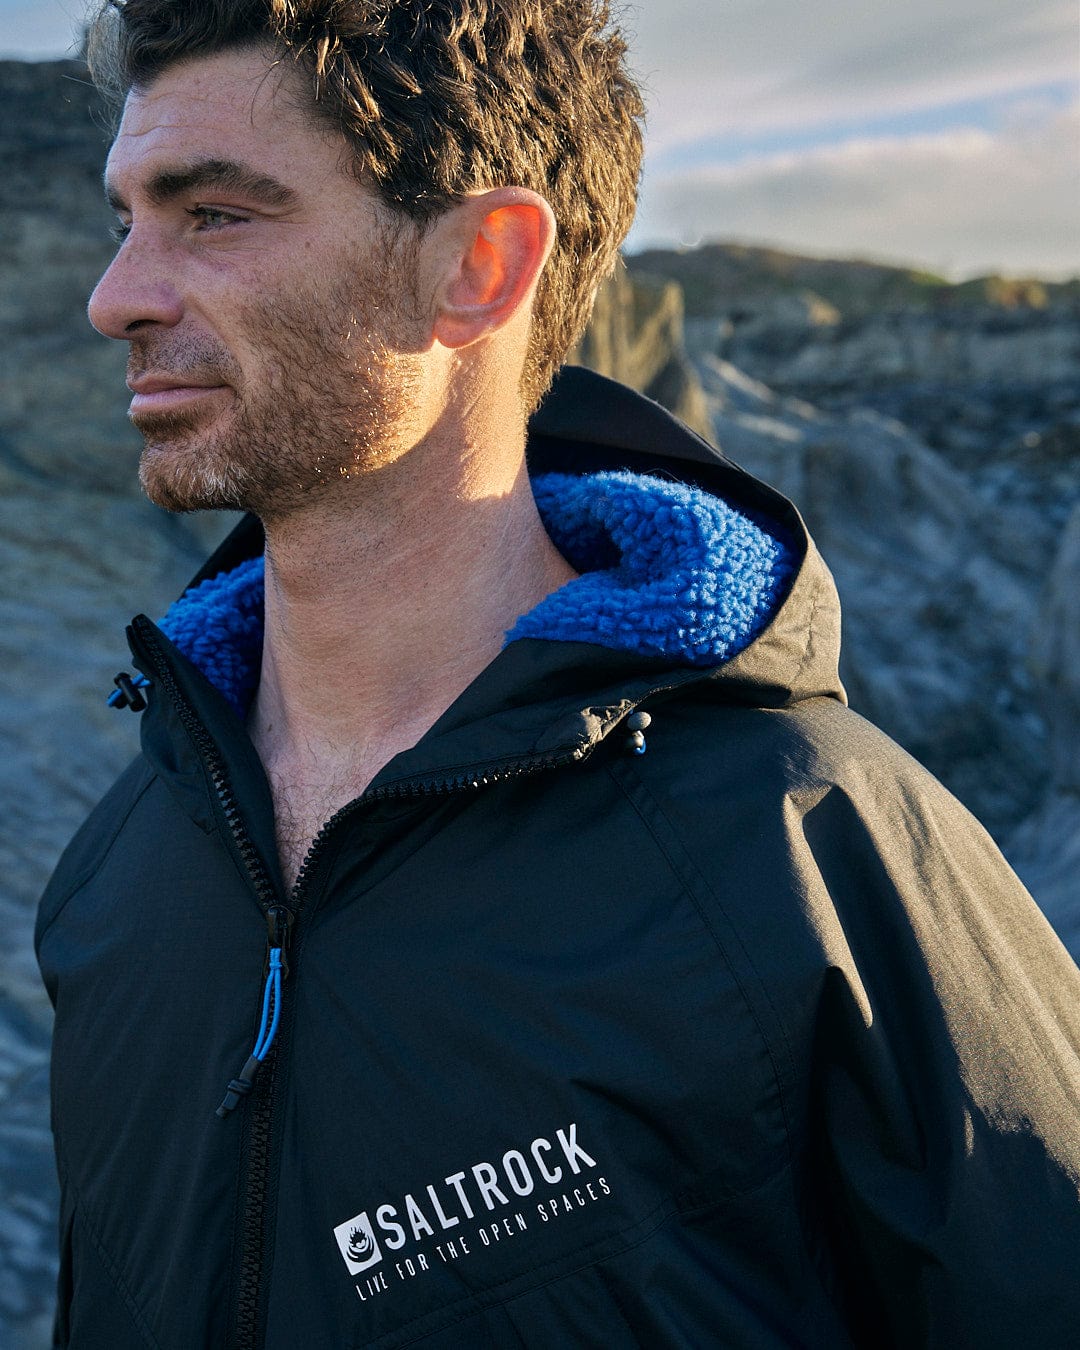 A Saltrock outdoor enthusiast in a Four Seasons - Waterproof Changing Robe - Black/Blue standing in front of rocks.